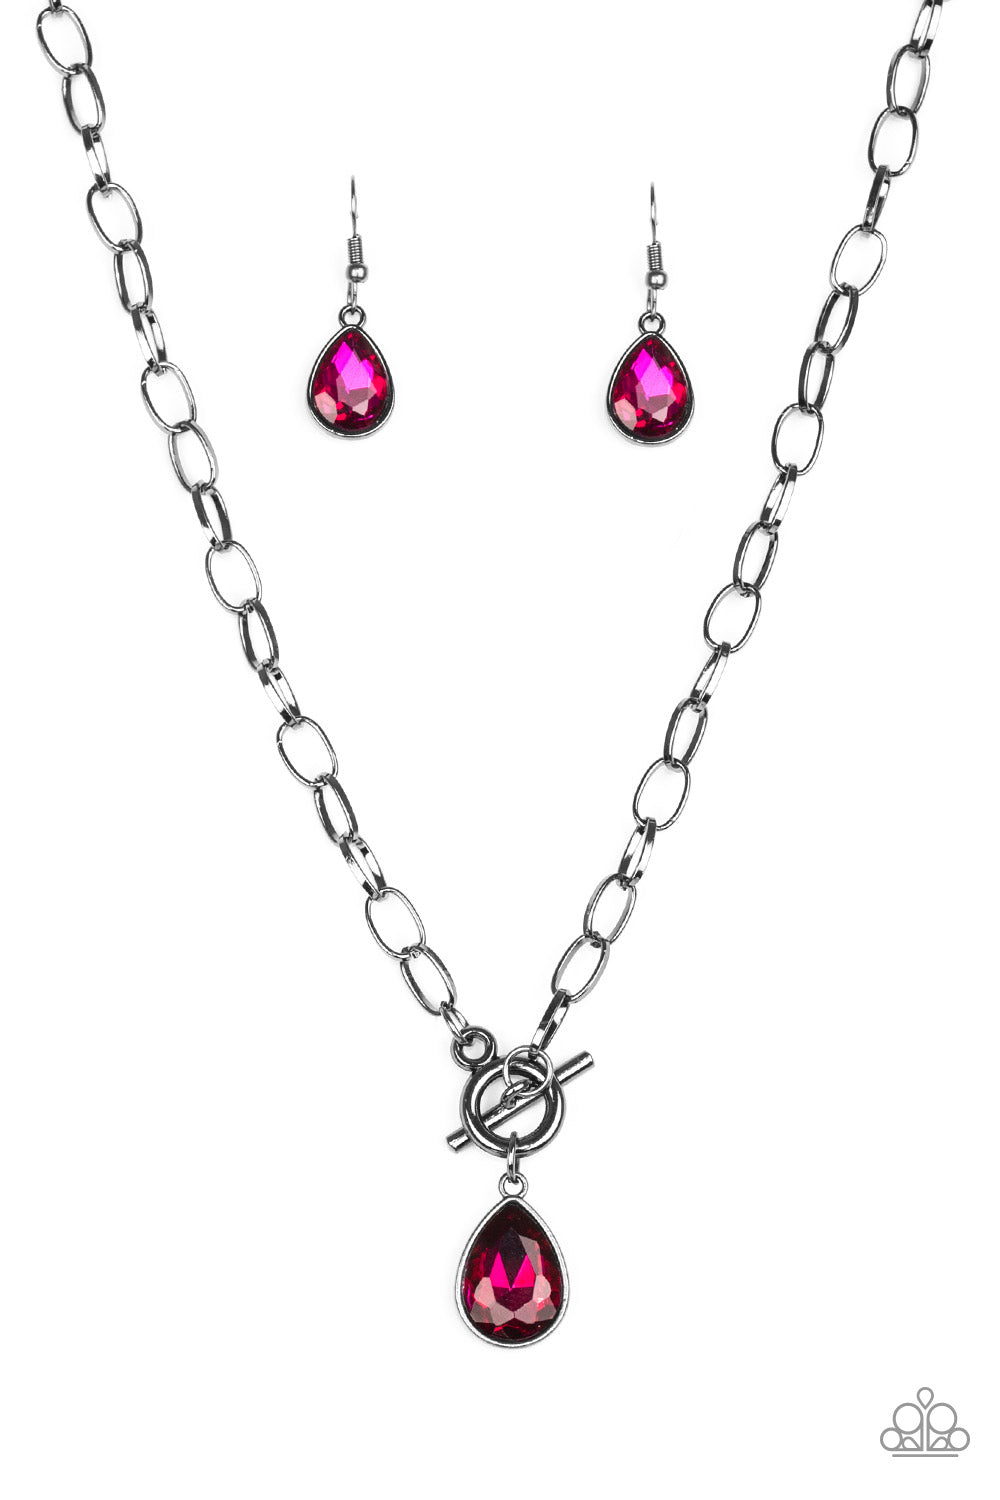 A faceted pink teardrop gem swings from the bottom of a glistening gunmetal chain, creating a classic pendant below the collar. Features a toggle closure.